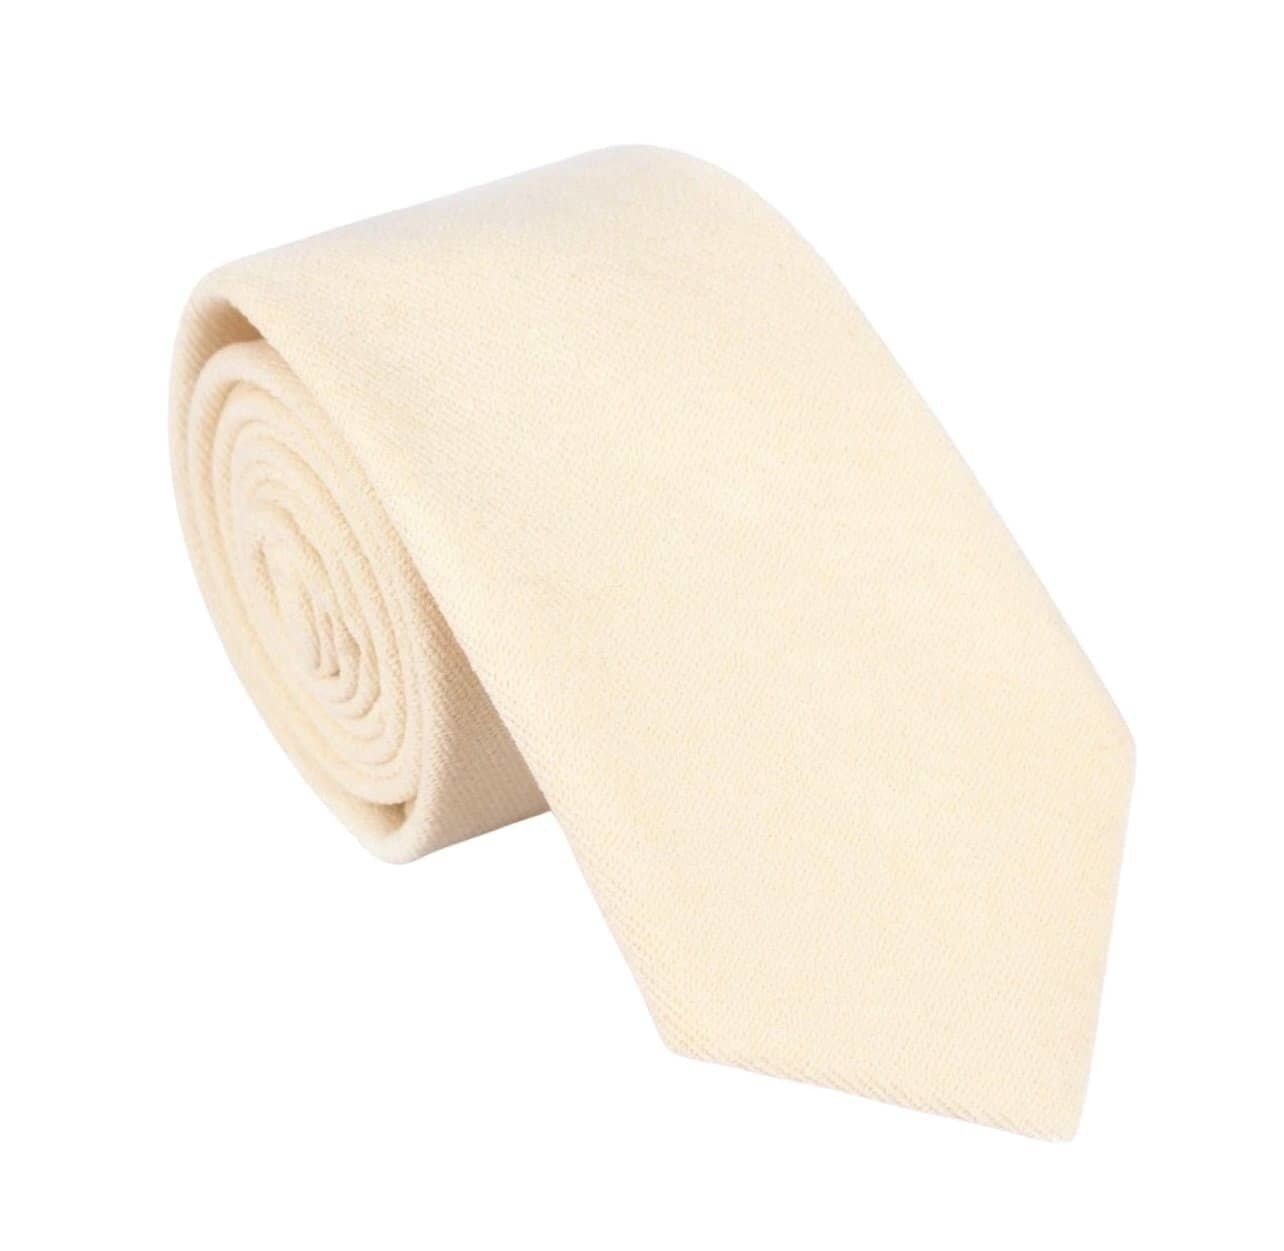 Cream Skinny tie for men 2.36 - GILLYFLOWER - MYTIESHOP-Neckties-Cream Skinny tie for men Men’s Floral Necktie for weddings and events, great for prom and anniversary gifts. Mens floral ties near me us ties-Mytieshop. Skinny ties for weddings anniversaries. Father of bride. Groomsmen. Cool skinny neckties for men. Neckwear for prom, missions and fancy events. Gift ideas for men. Anniversaries ideas. Wedding aesthetics. Flower ties. Dry flower ties.